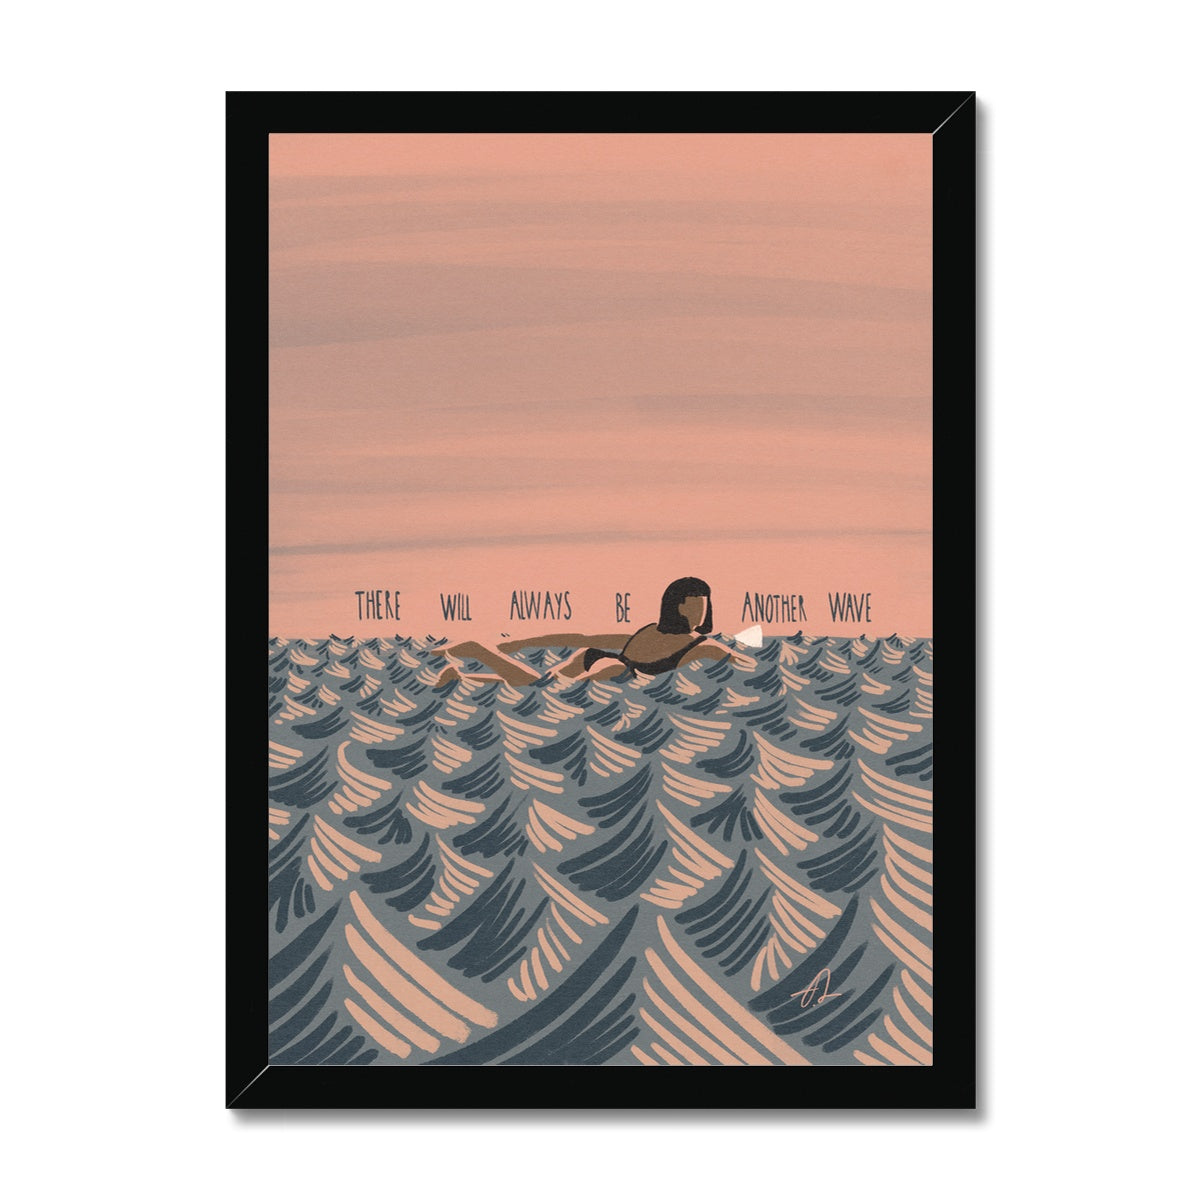 There will always be another wave Framed Print